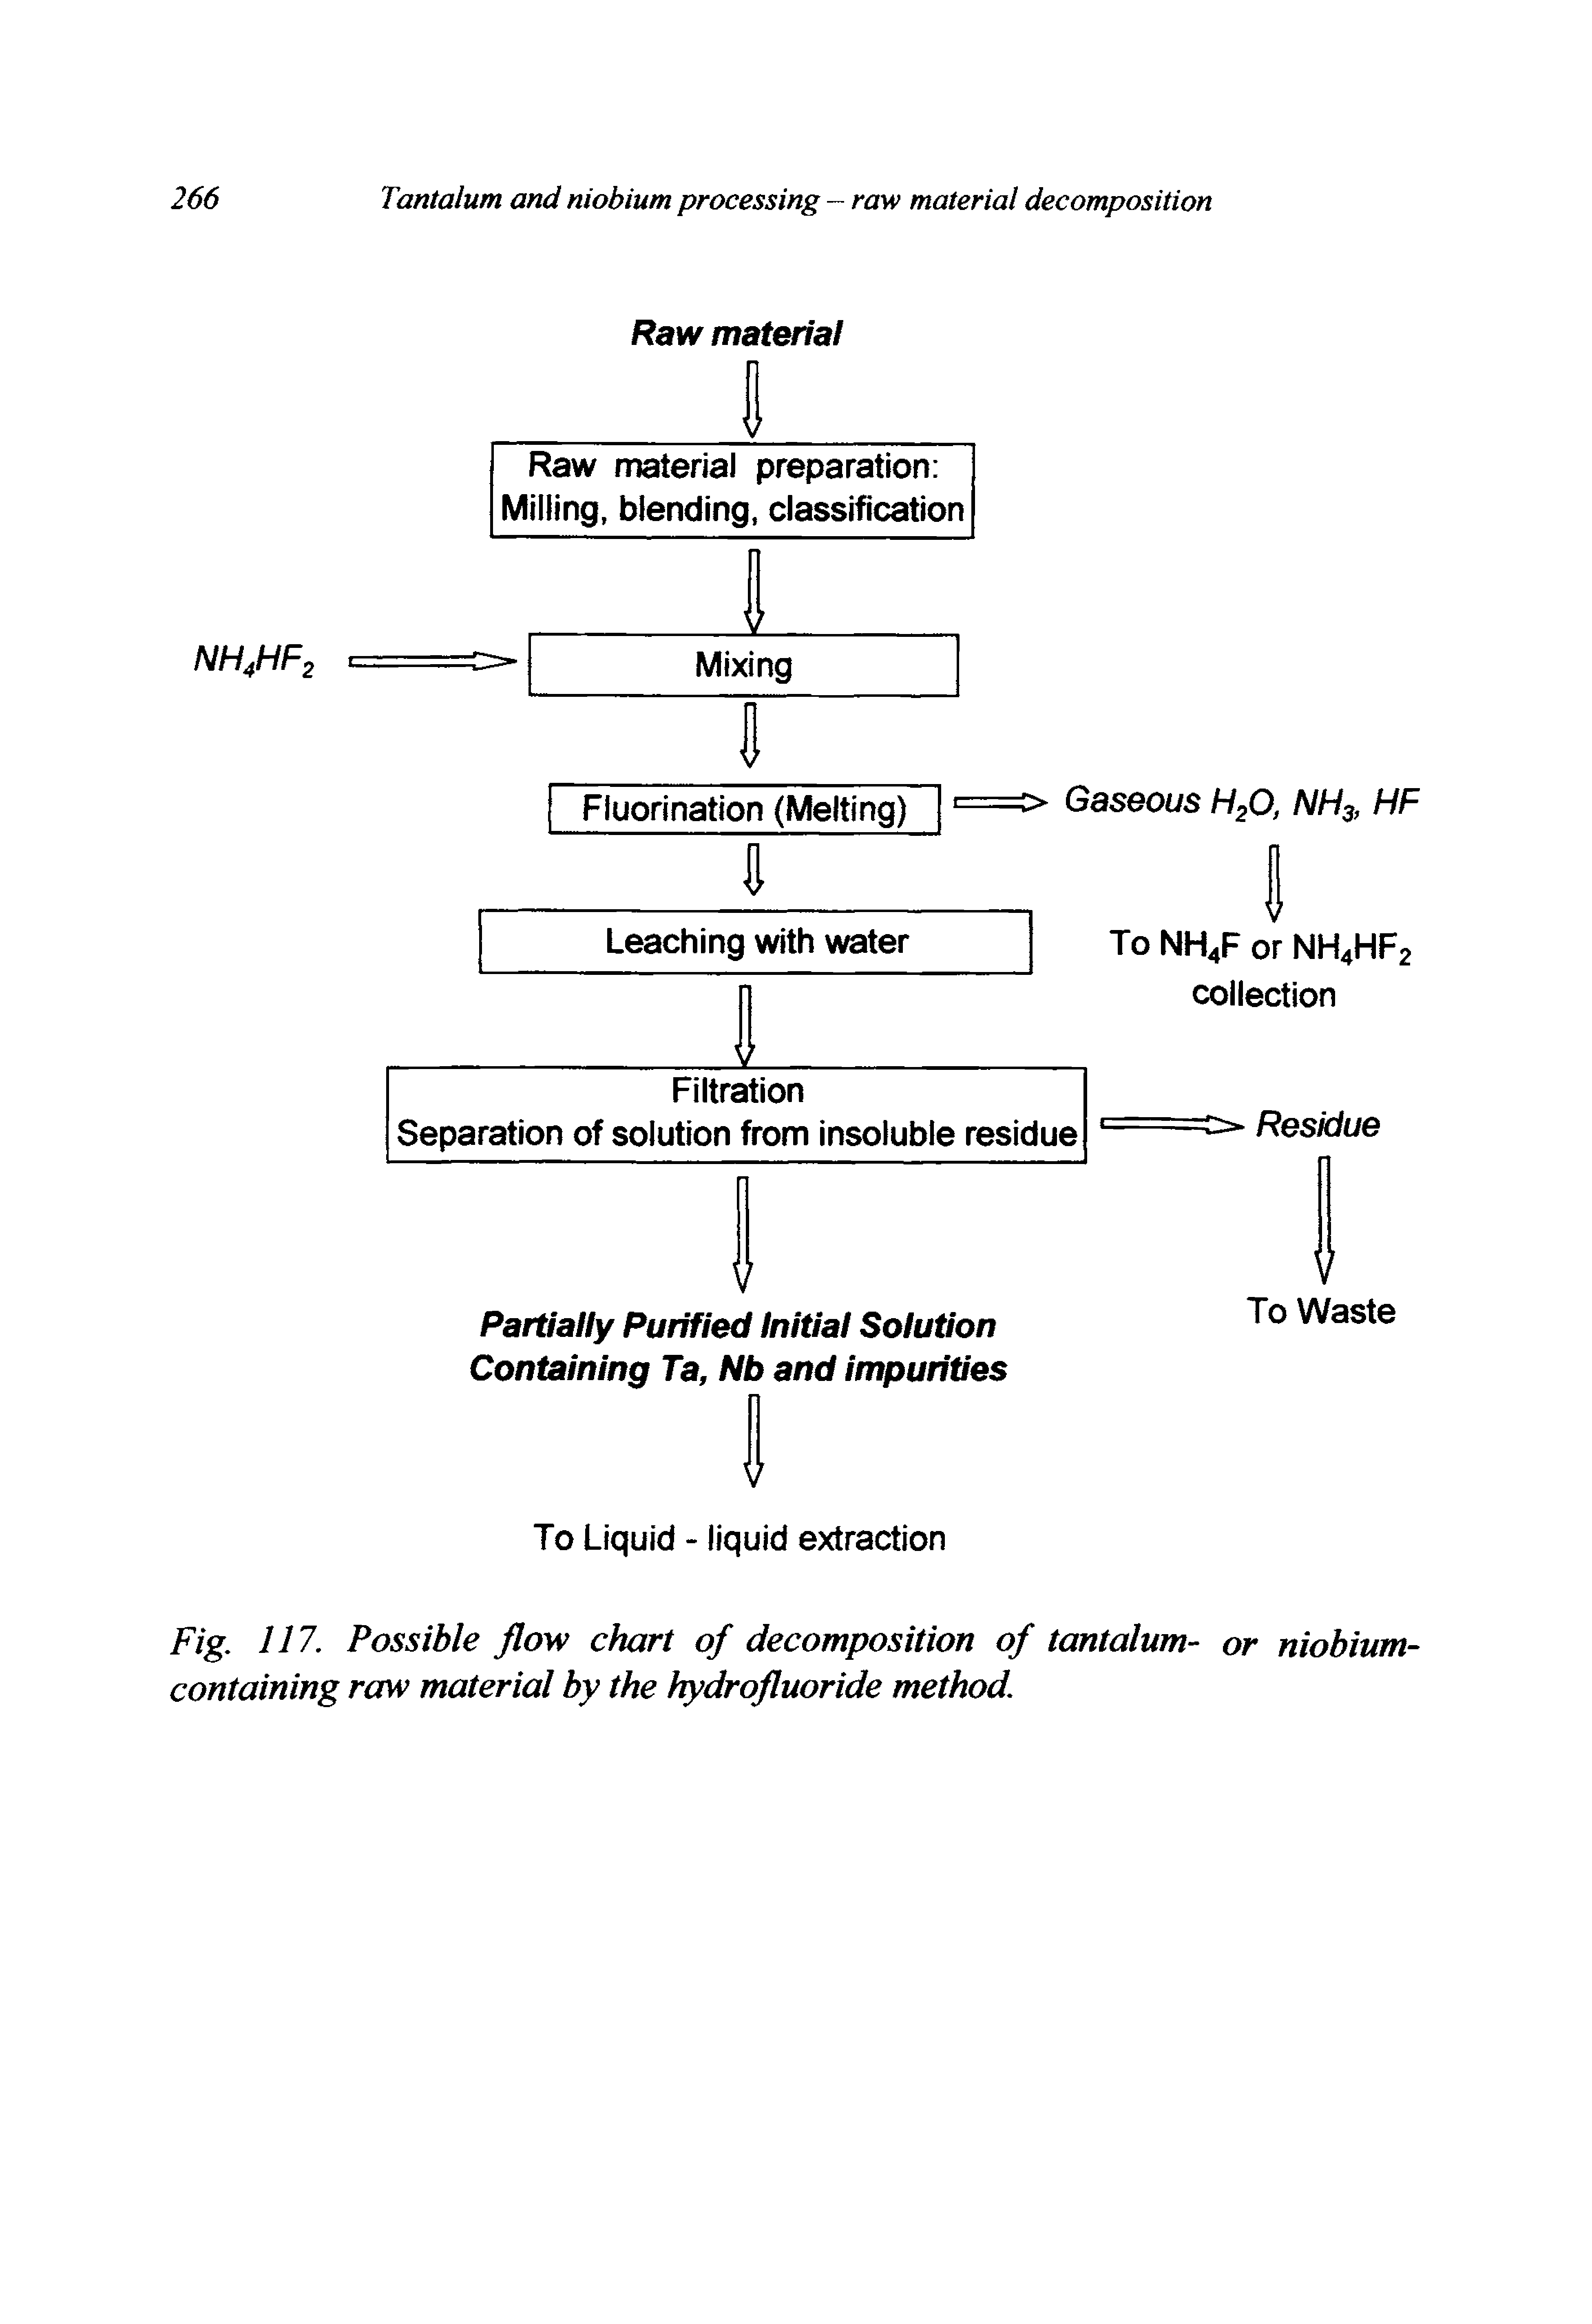 Fig. 117. Possible flow chart of decomposition of tantalum- or niobium-containing raw material by the hydrofluoride method.